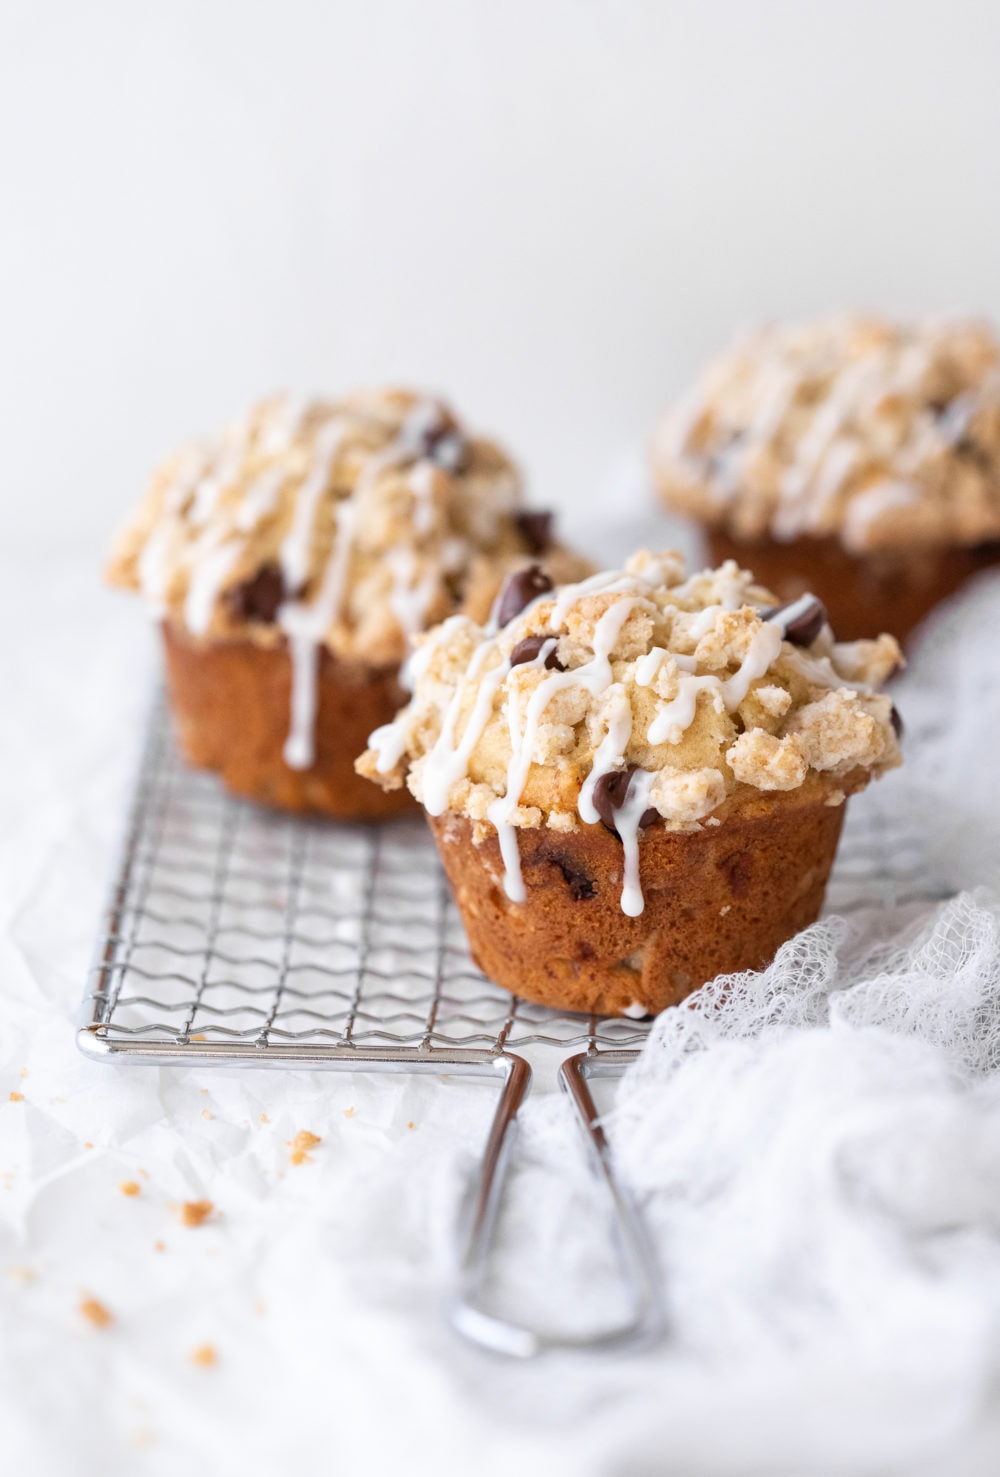 Three gluten-free banana chocolate chip muffins placed on a safety grater over a white backdrop.